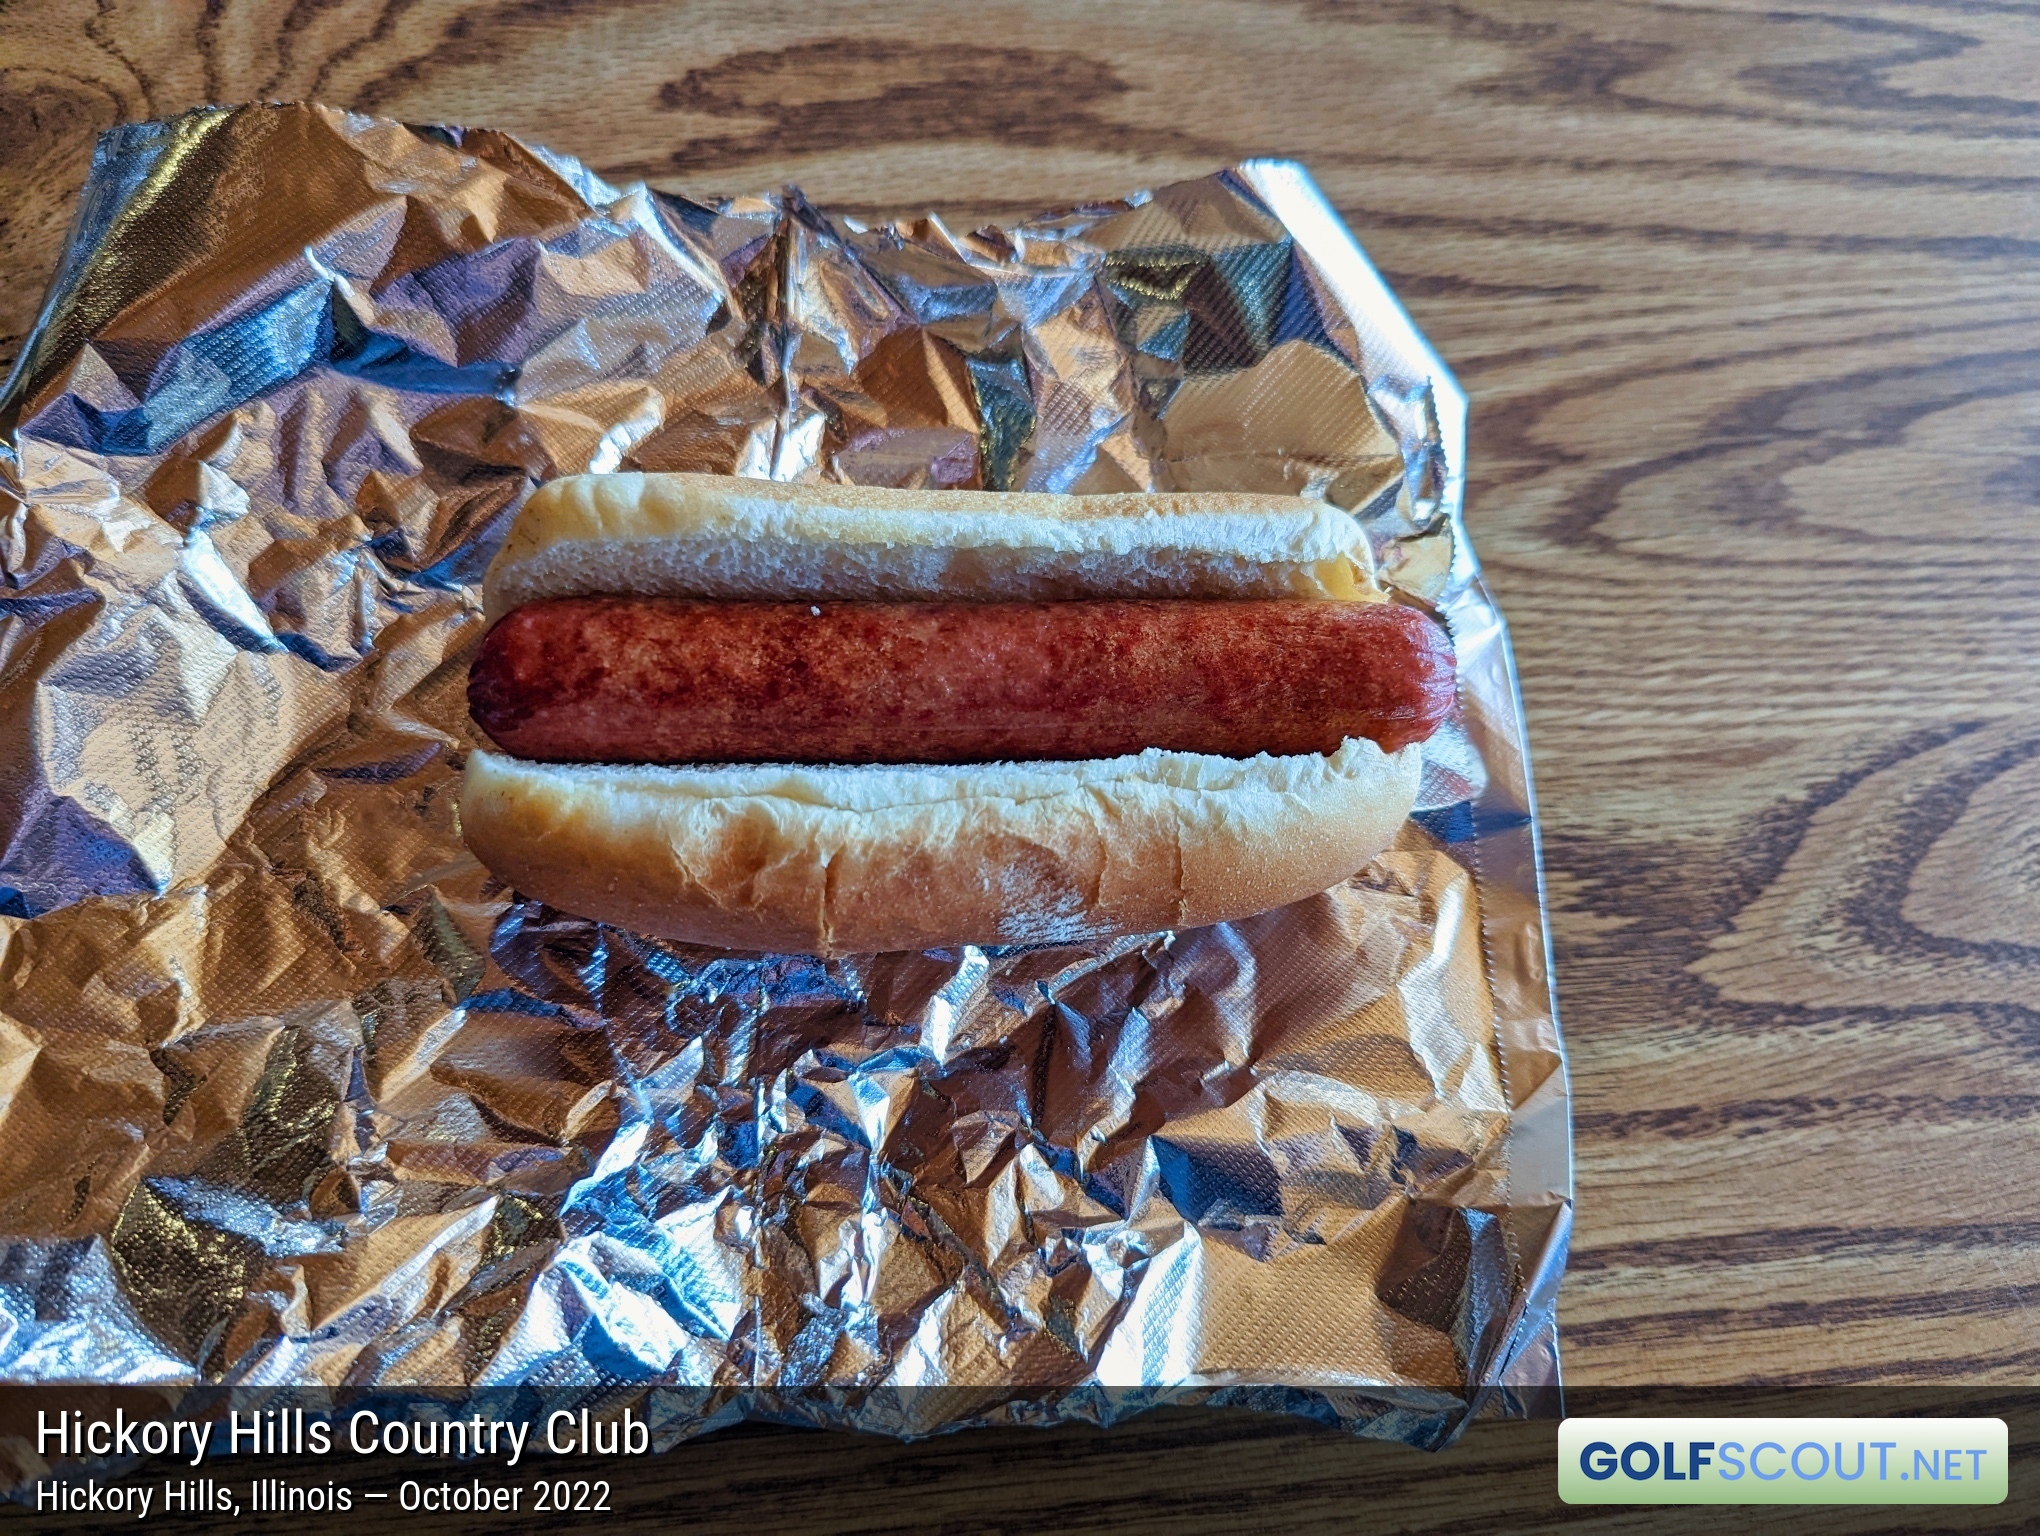 Photo of the food and dining at Hickory Hills Country Club in Hickory Hills, Illinois. Photo of the hot dog at Hickory Hills Country Club in Hickory Hills, Illinois.